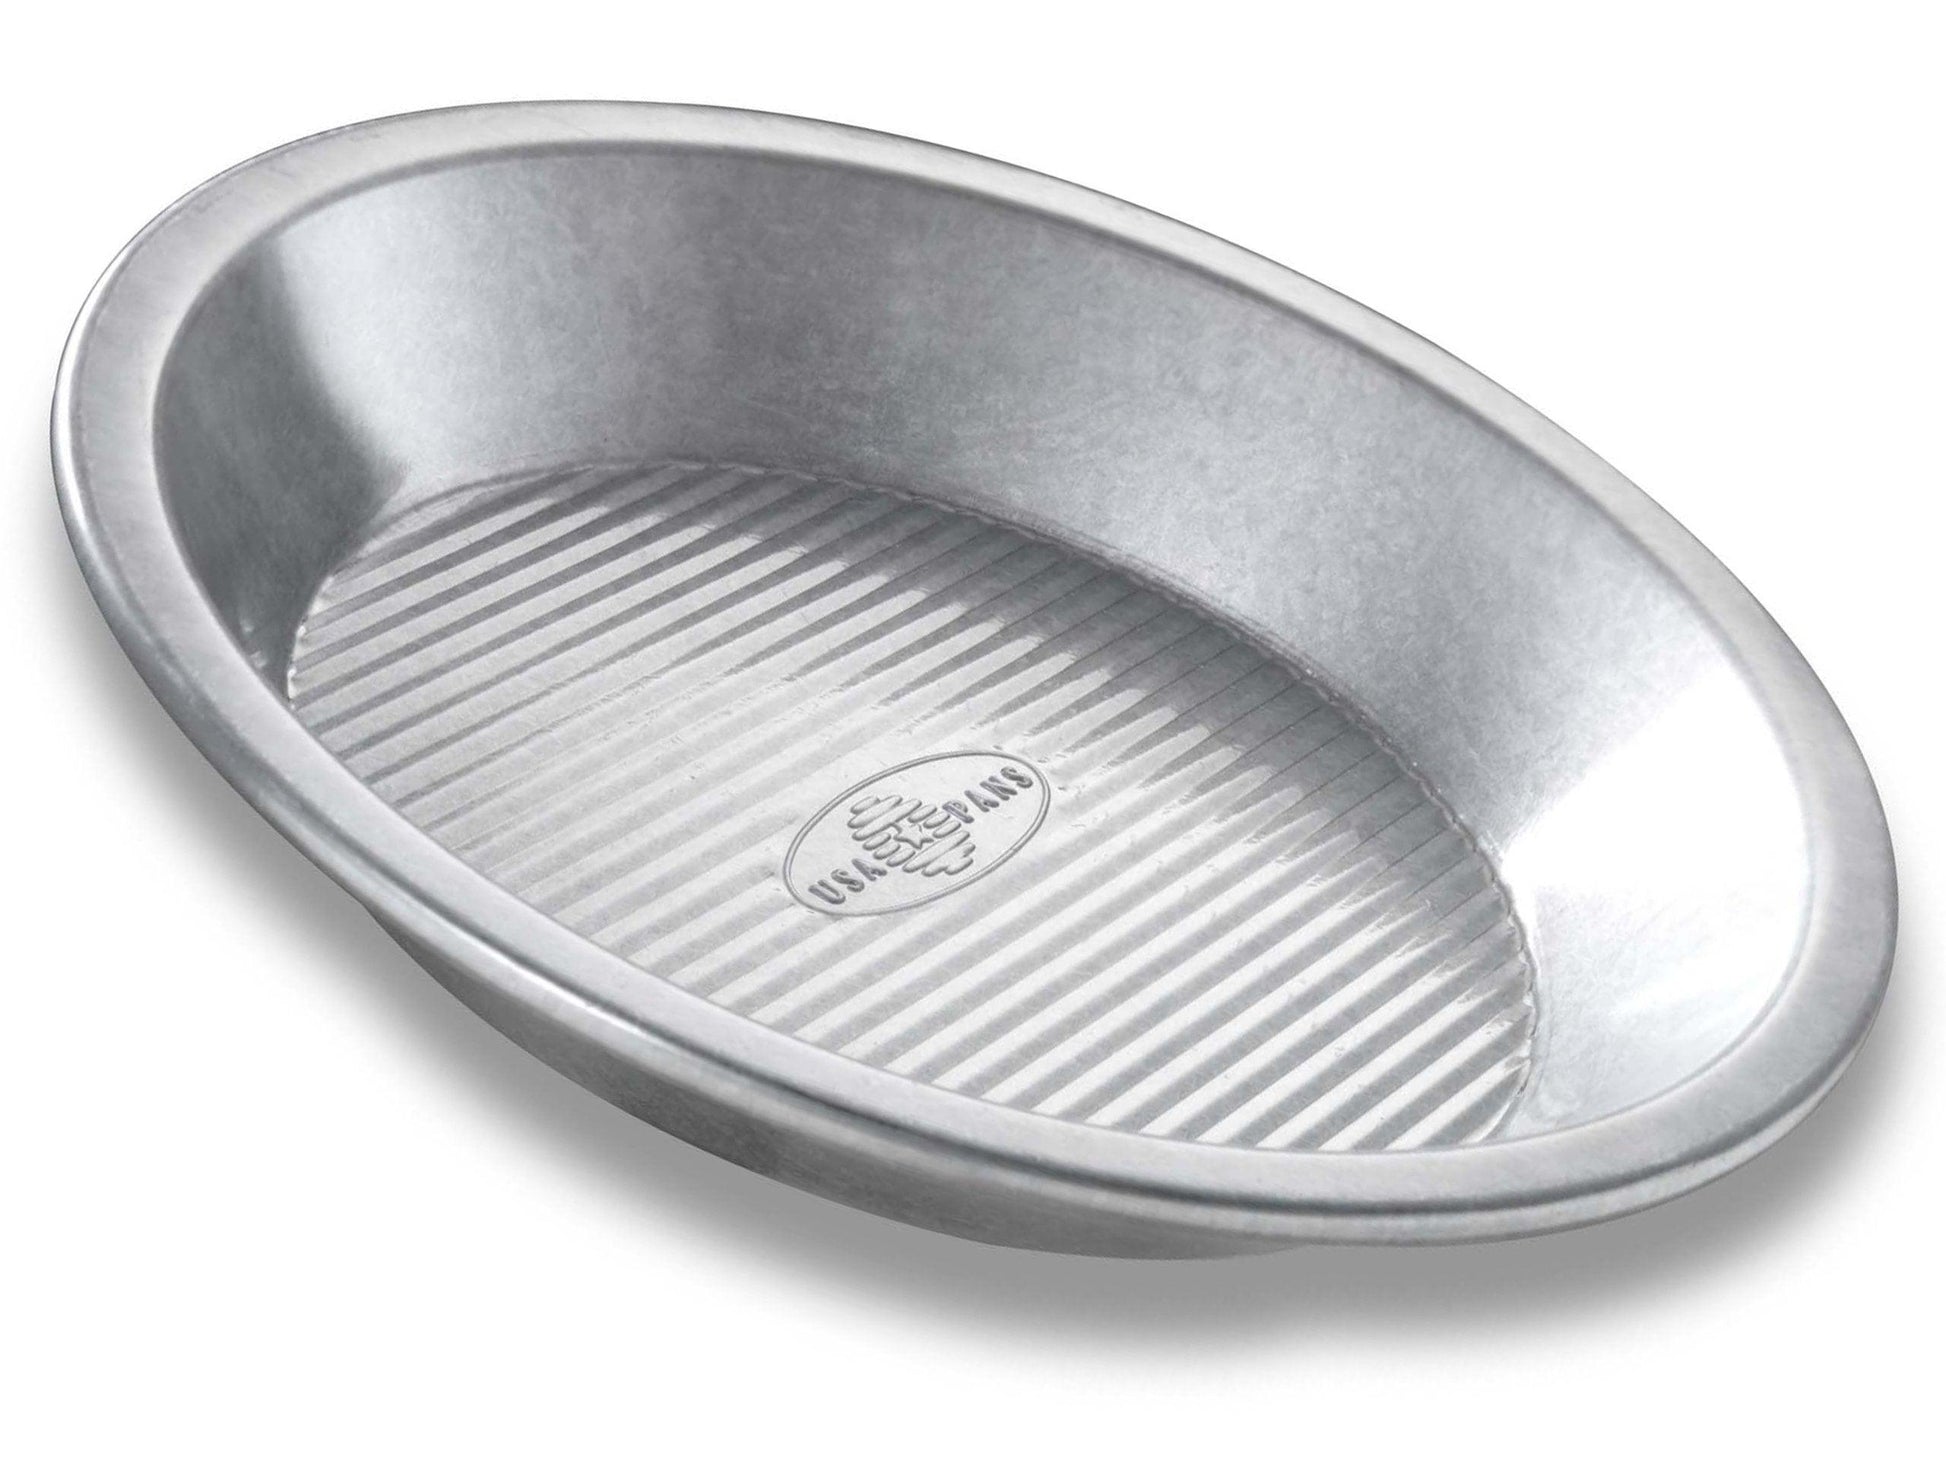 USA Pan Bakeware Aluminized Steel Pie Pan, 9-Inch - CookCave